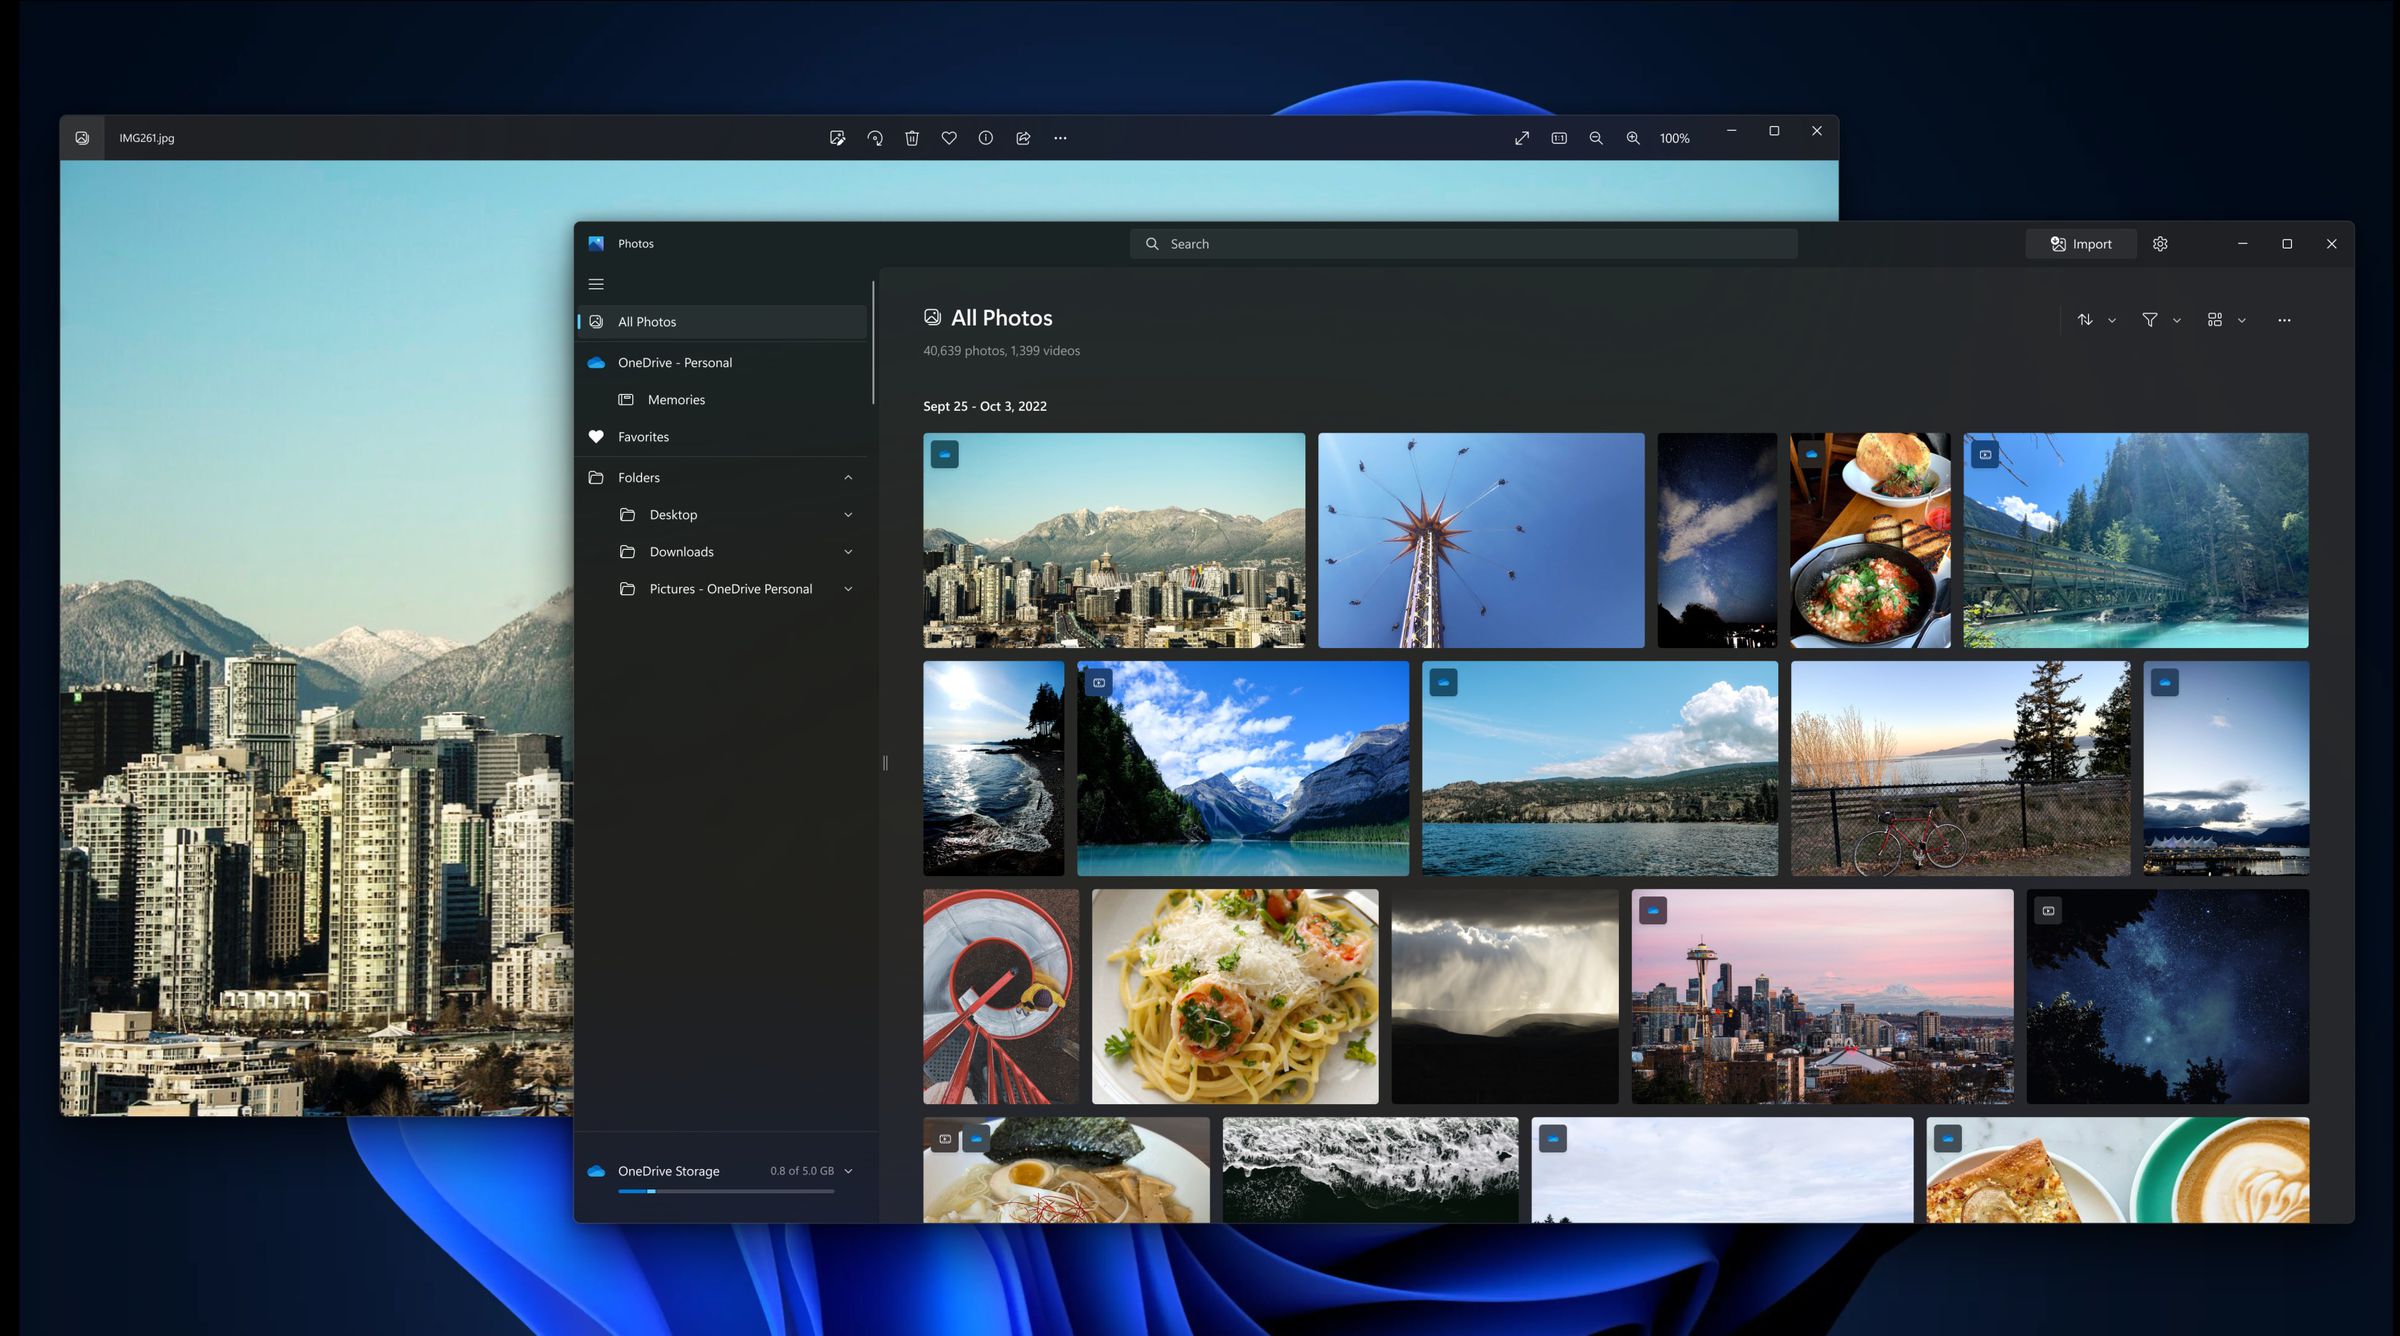 One Windows 11 window shows Microsoft’s redesigned Photos app. Behind it is another window showing a large photo.